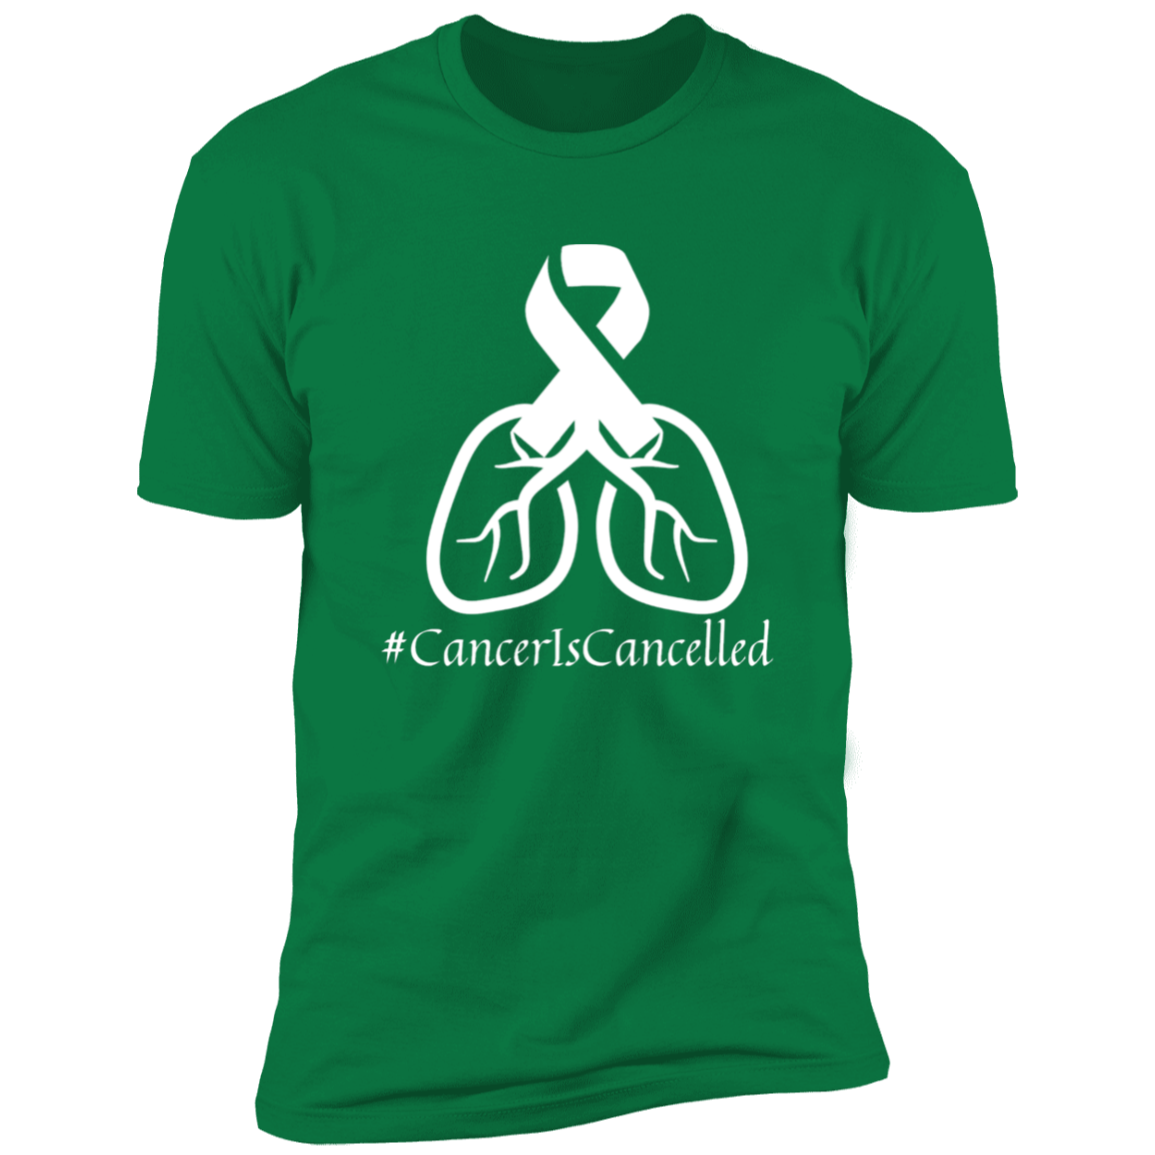 Cancer Is Cancelled Tee - White logo